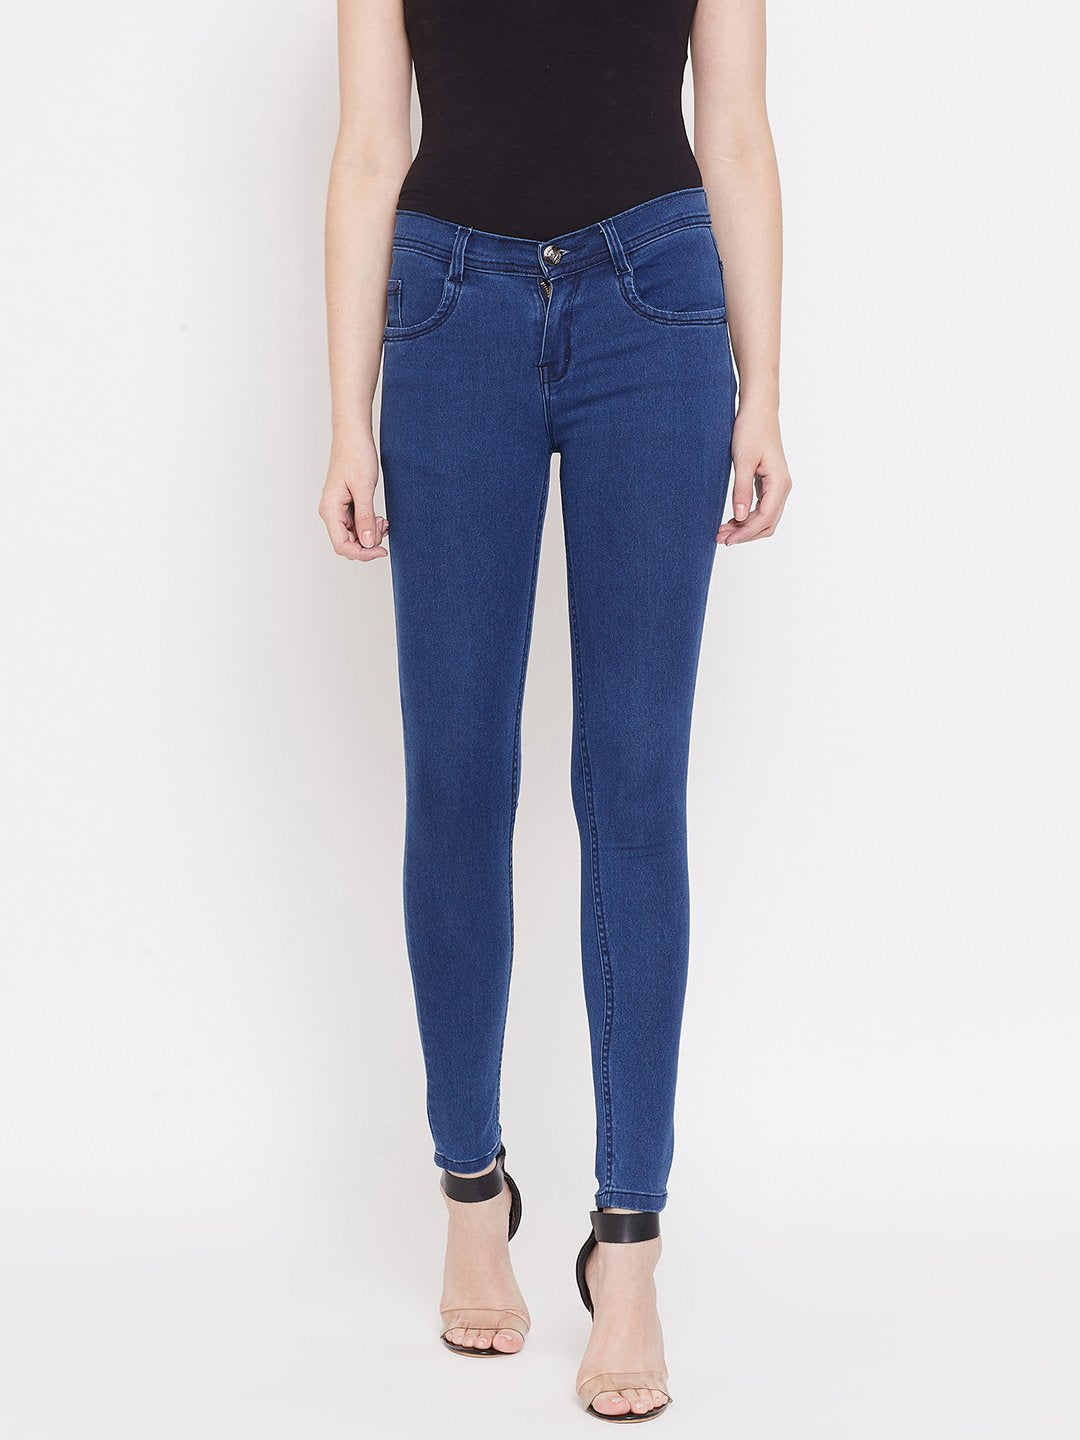 Slim Fit Stretchable Bata Blue Jeans - NiftyJeans